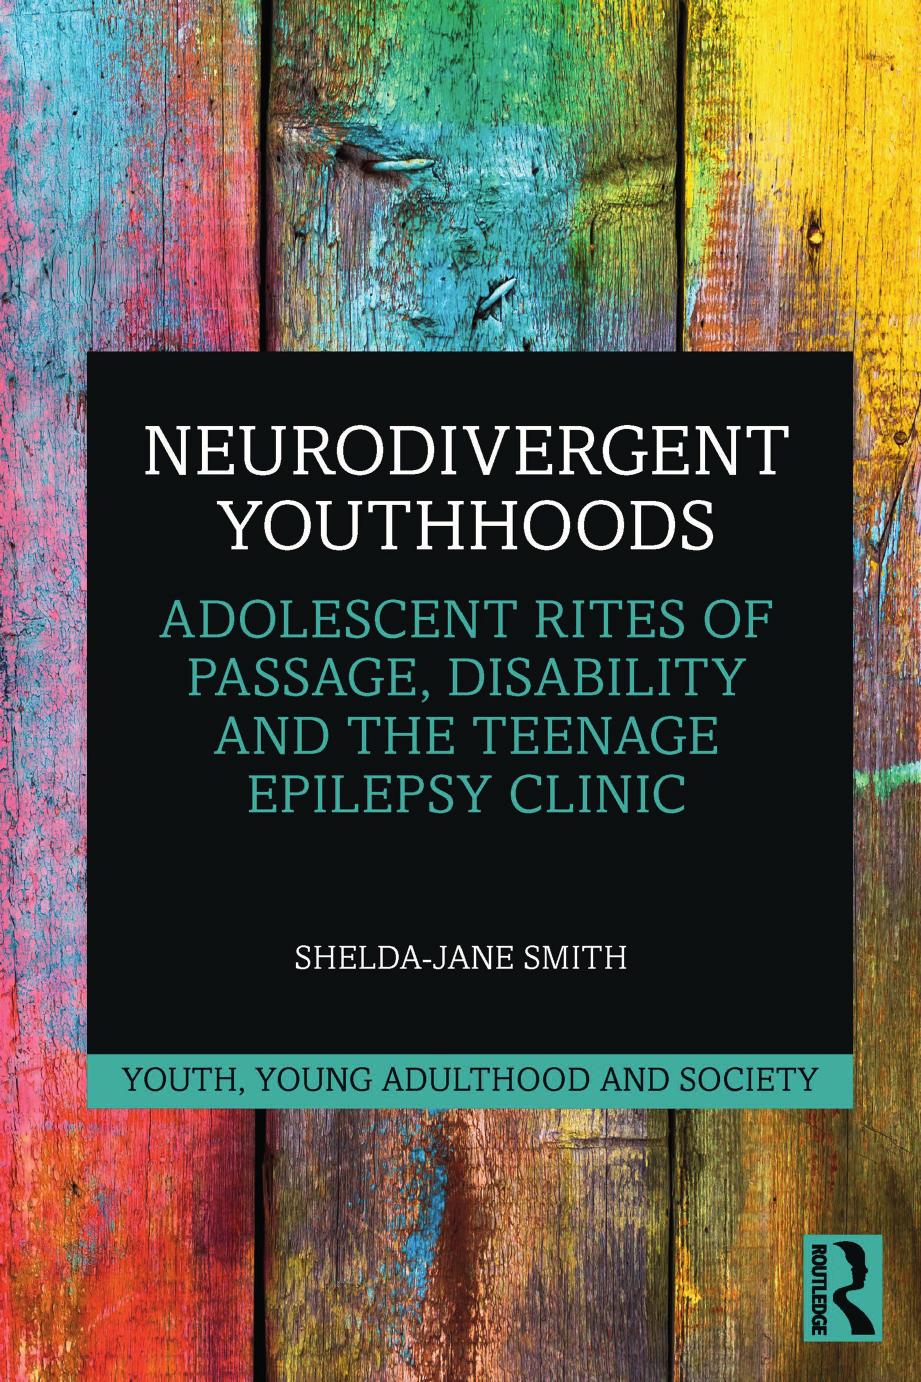 Neurodivergent Youthhoods (Youth, Young Adulthood and Society) by Shelda-Jane Smith